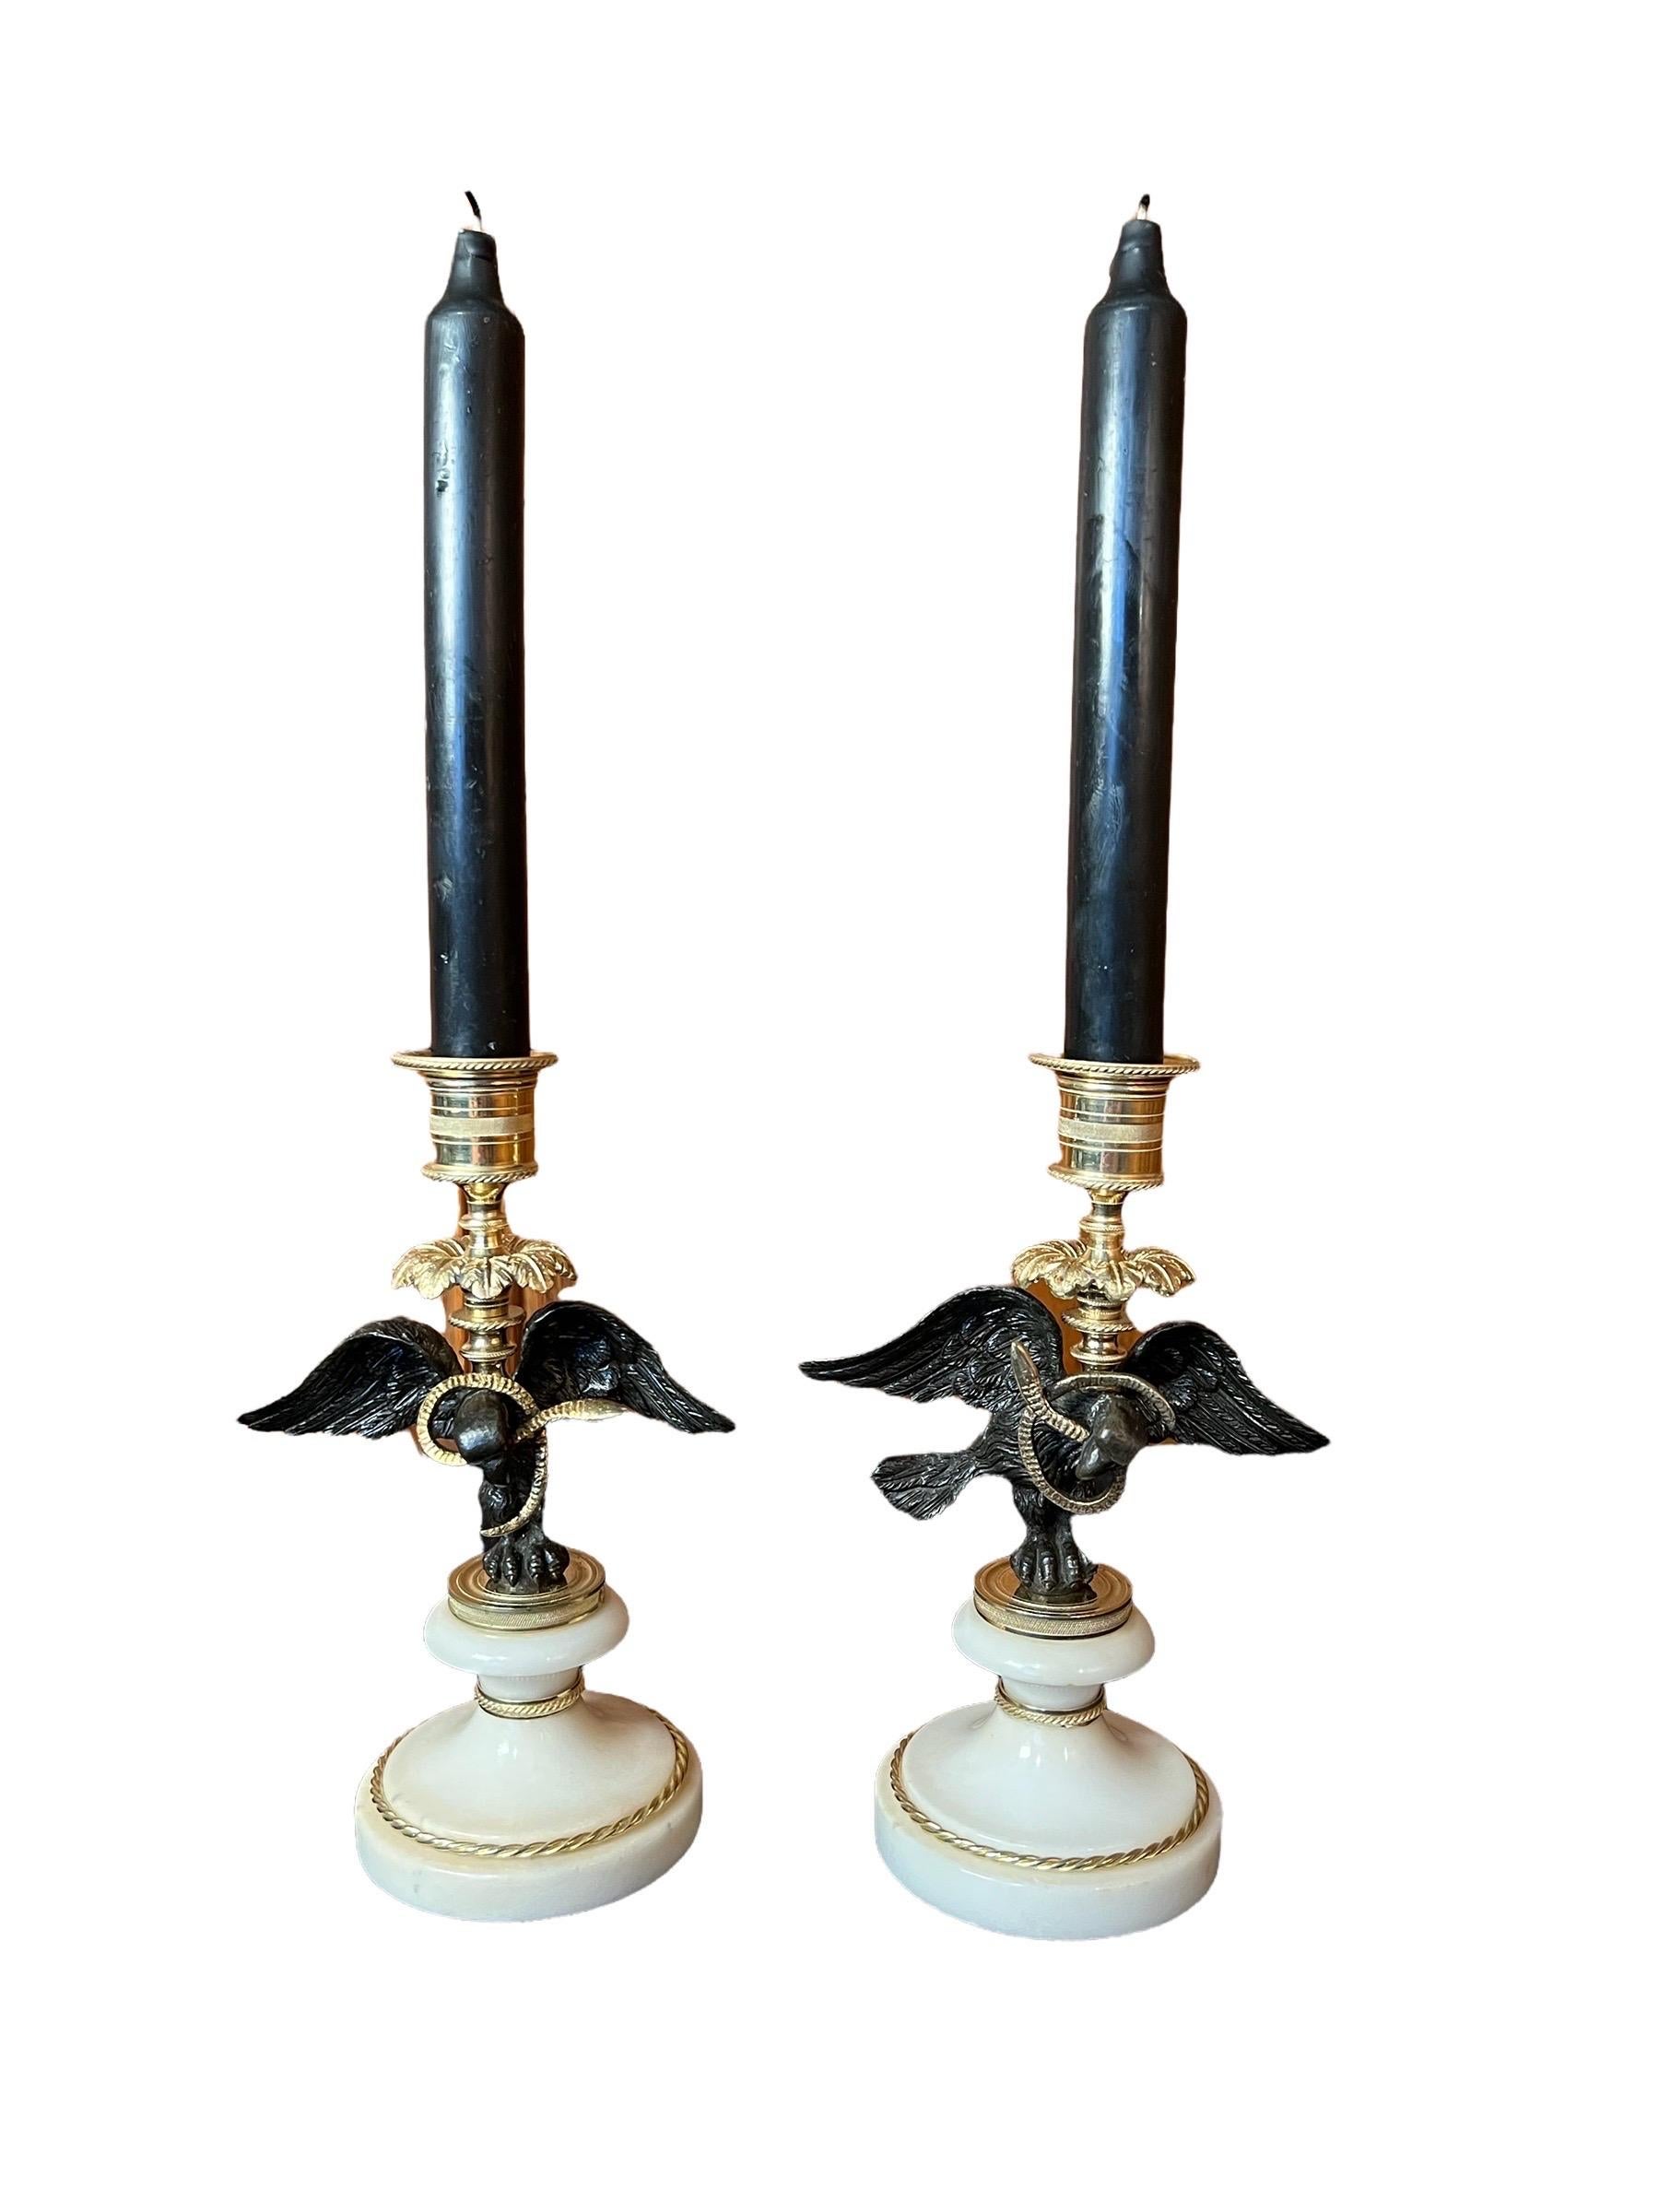 A Pair of Regency Bronze, Gilt-bronze & Marble Candle sticks. Gilt-bronze candle cup above black paginated  bronze eagles. The eagles clutching serpents, mounted on round white marble bases decorated with gilt-bronze rings. 